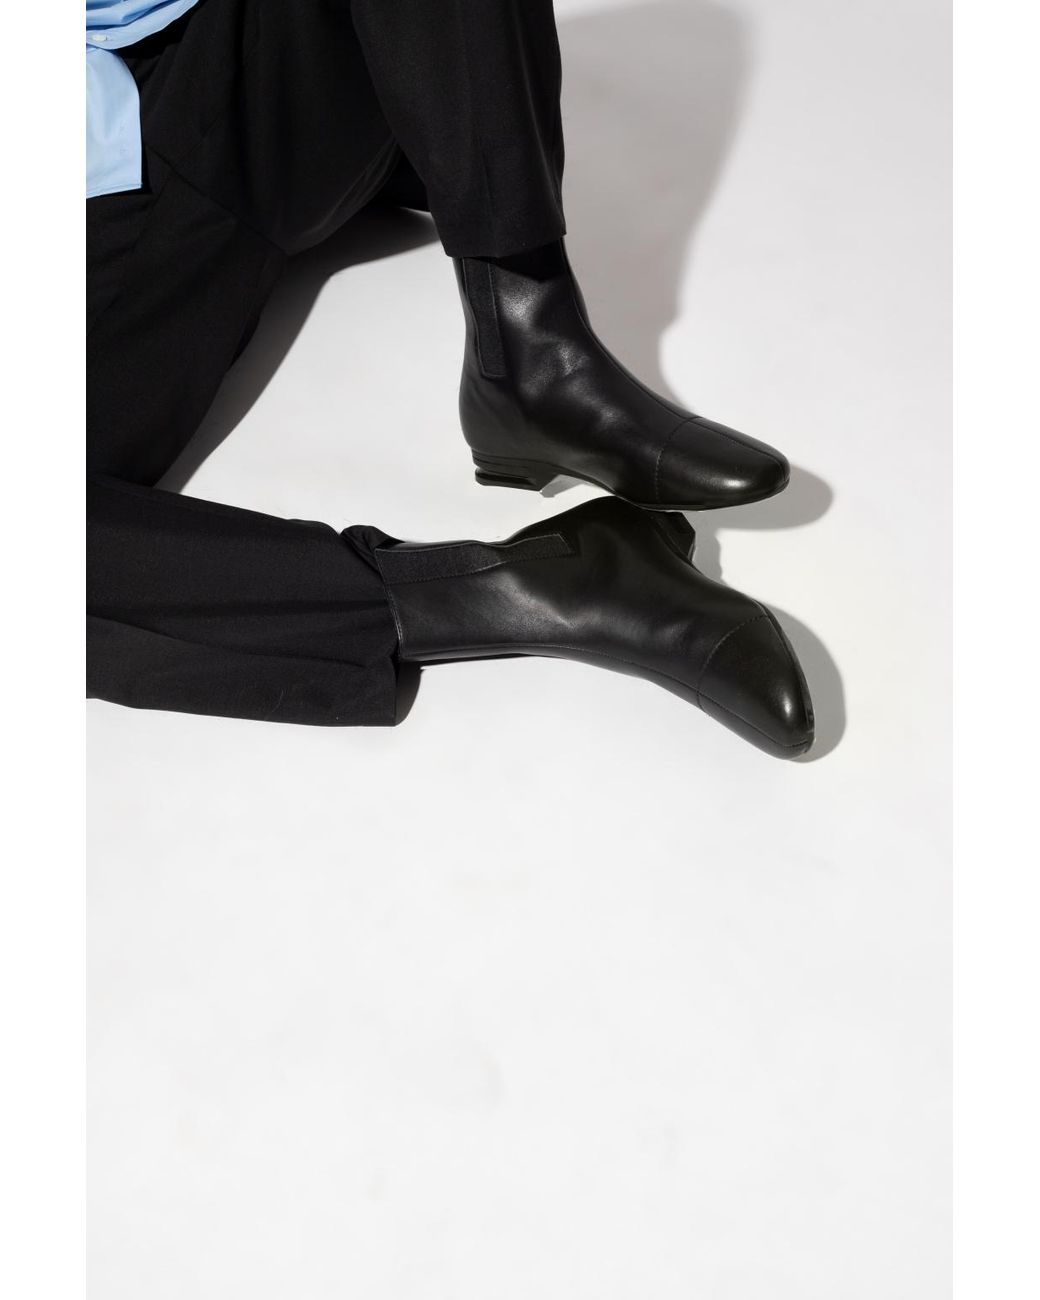 Raf Simons '2001' Heeled Ankle Boots in Men